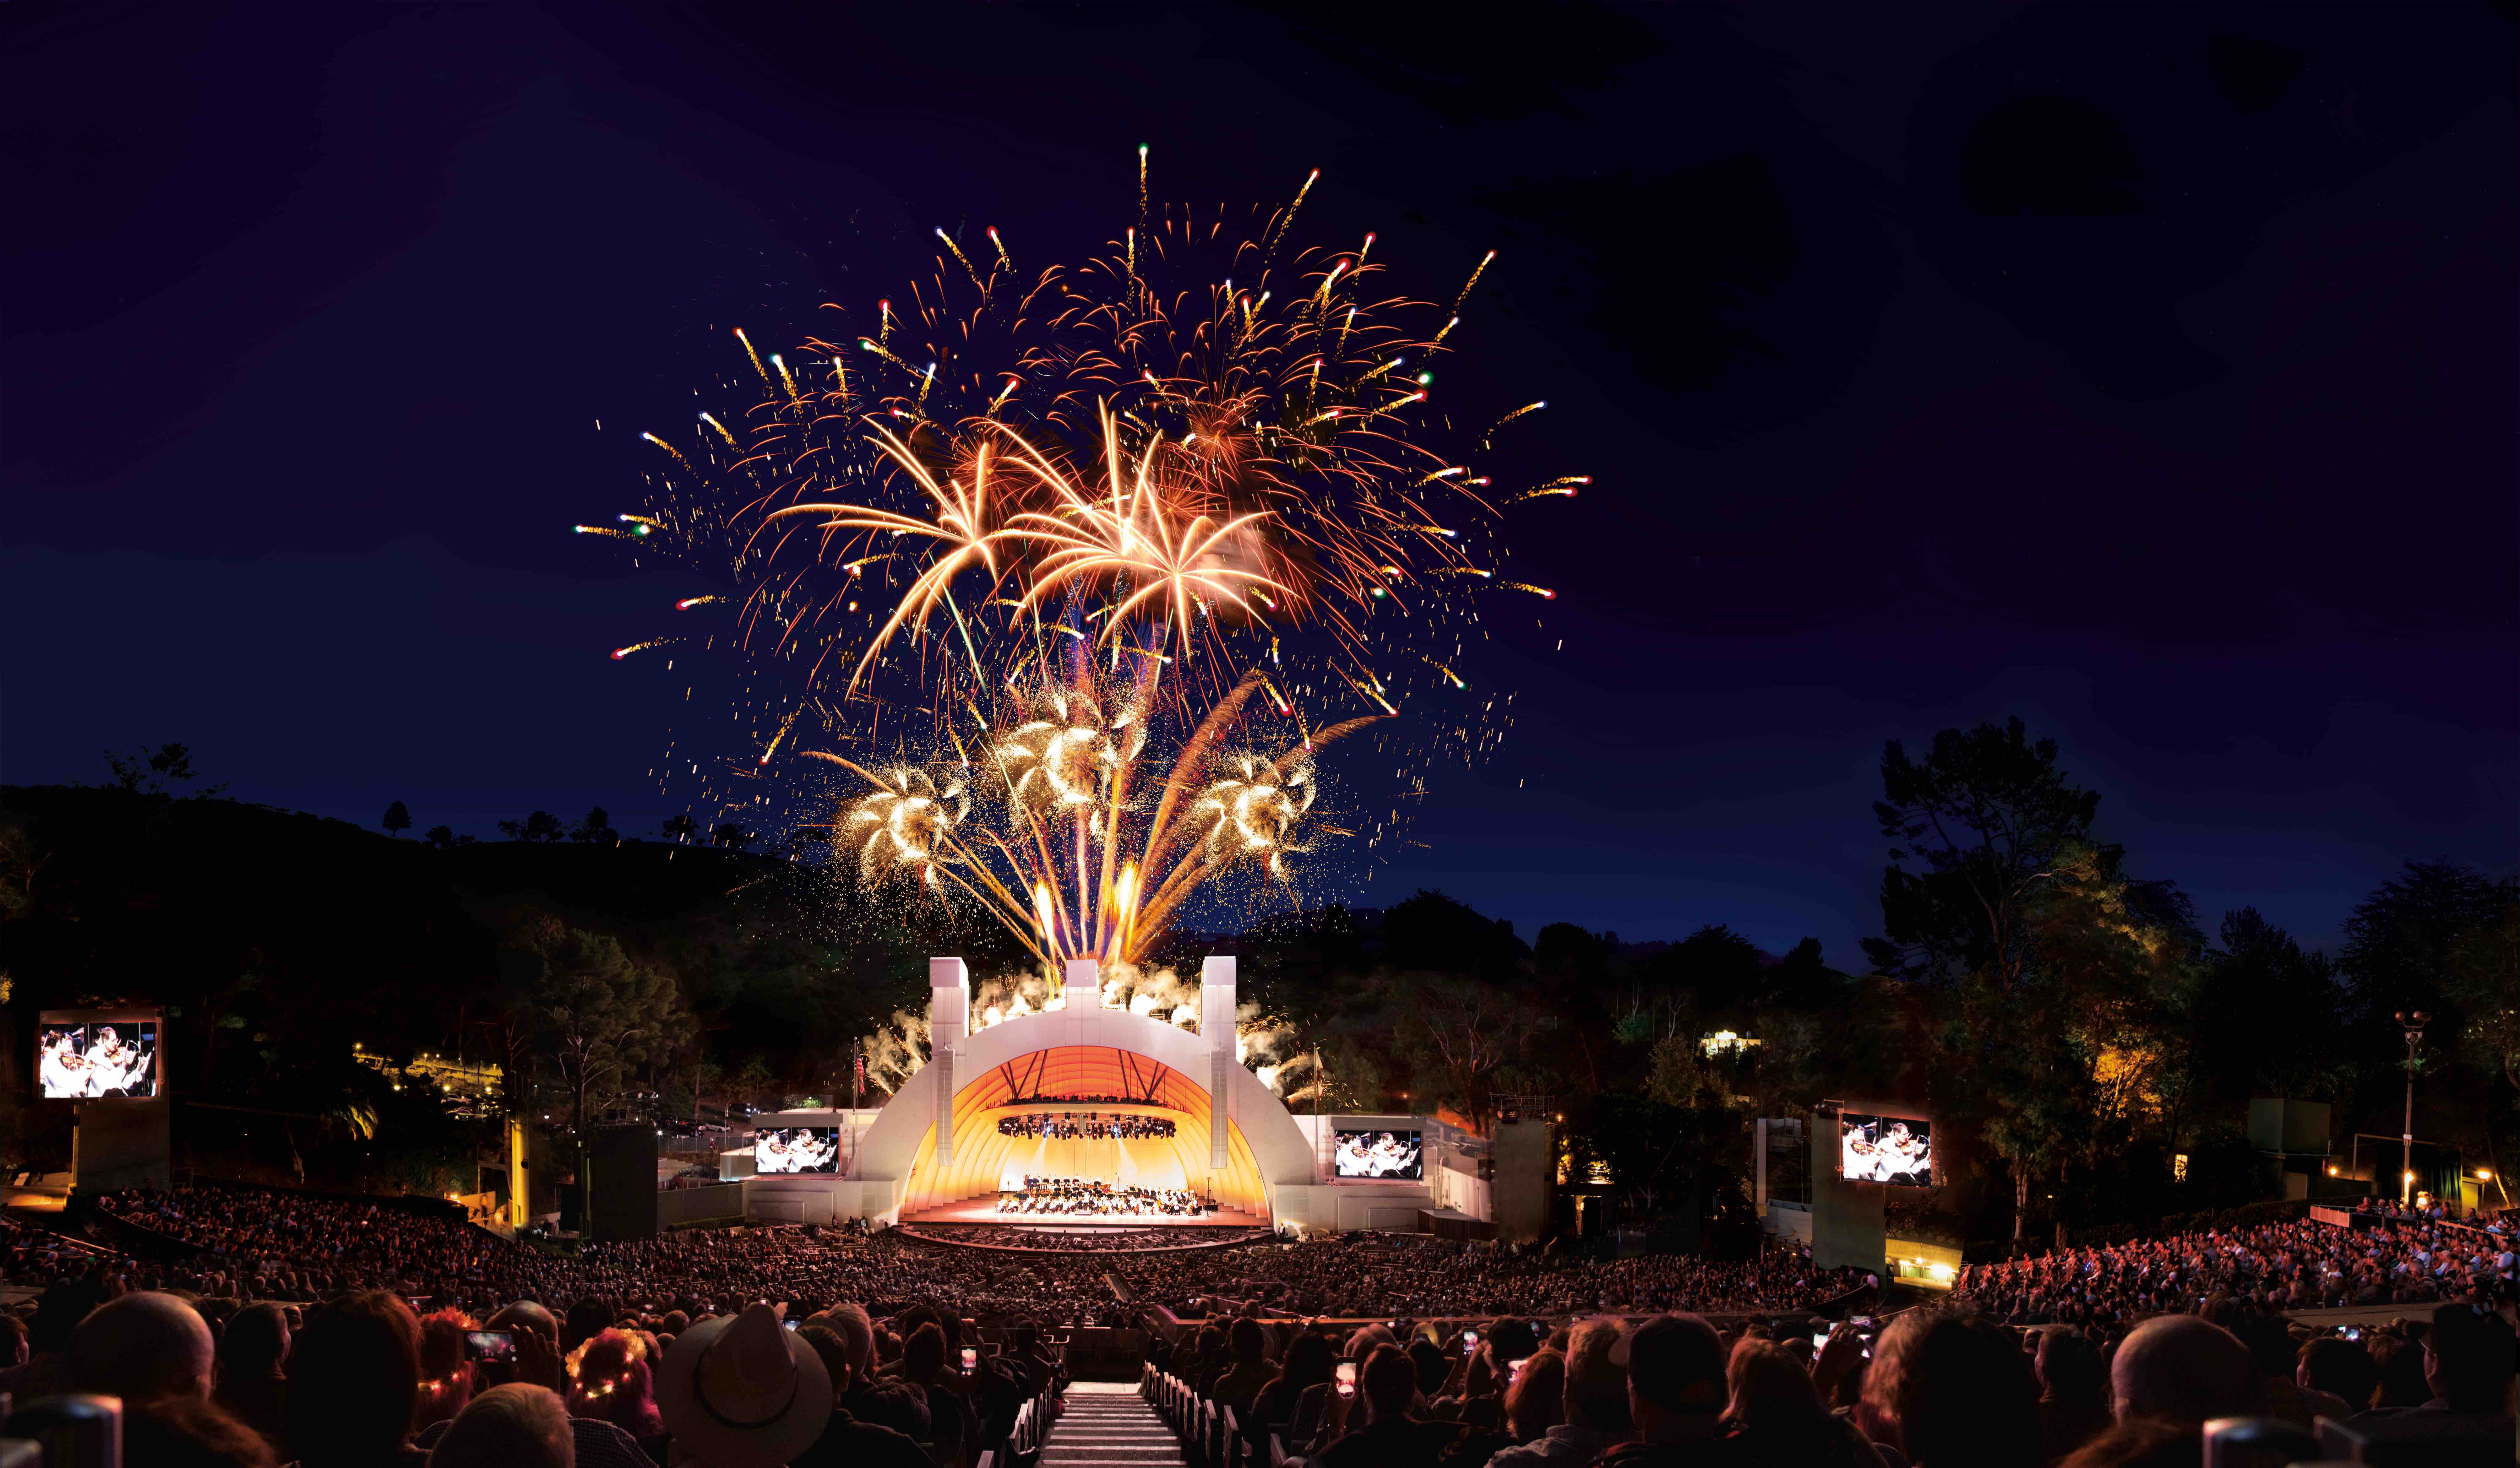 Hollywood Bowl shell with fireworks on July 4, 2014. Photo by Adam Latham.